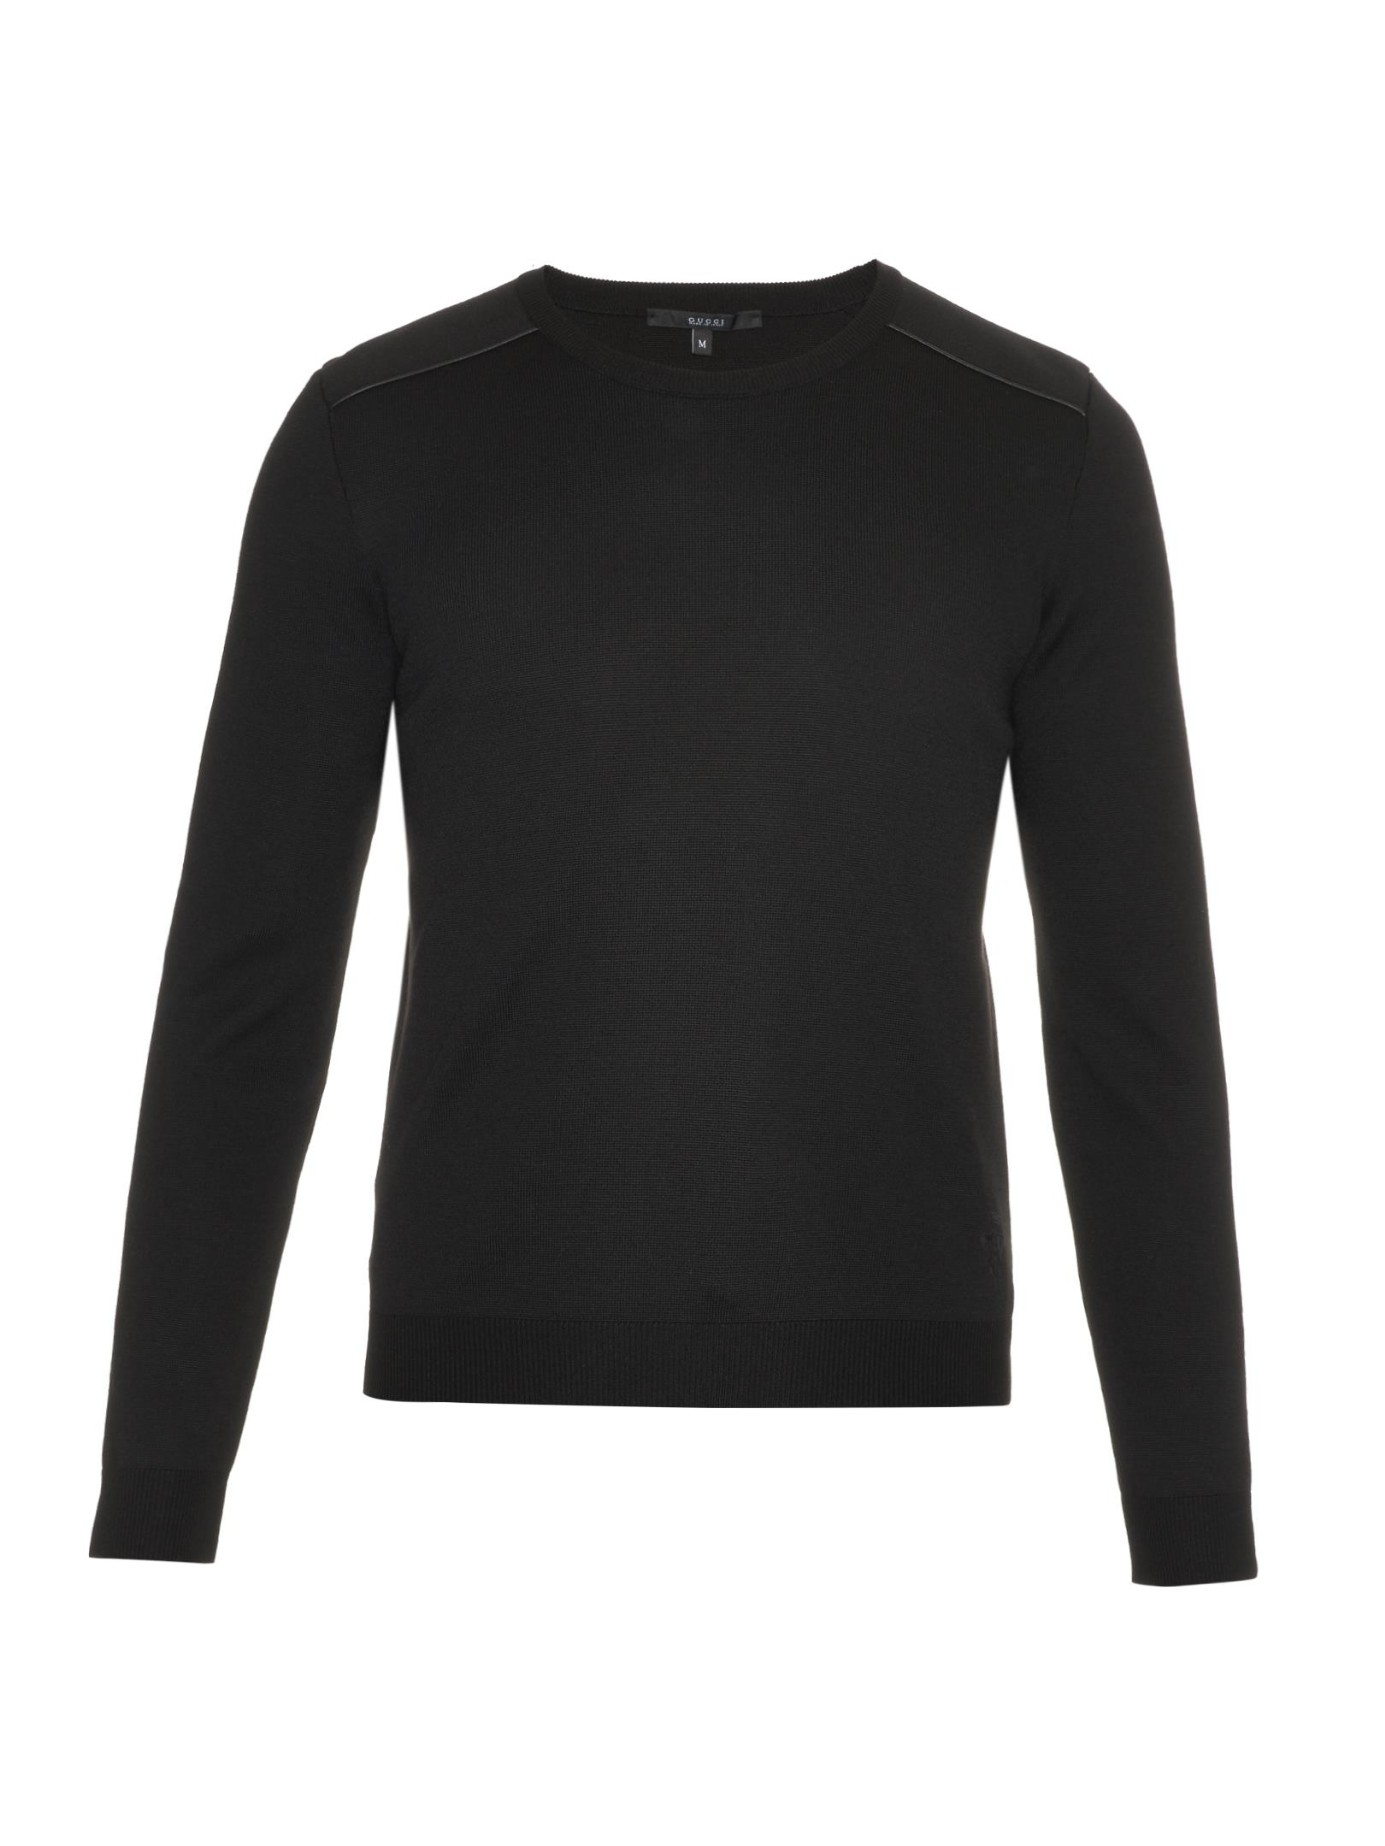 Gucci Crew-neck Wool Sweater in Black for Men | Lyst